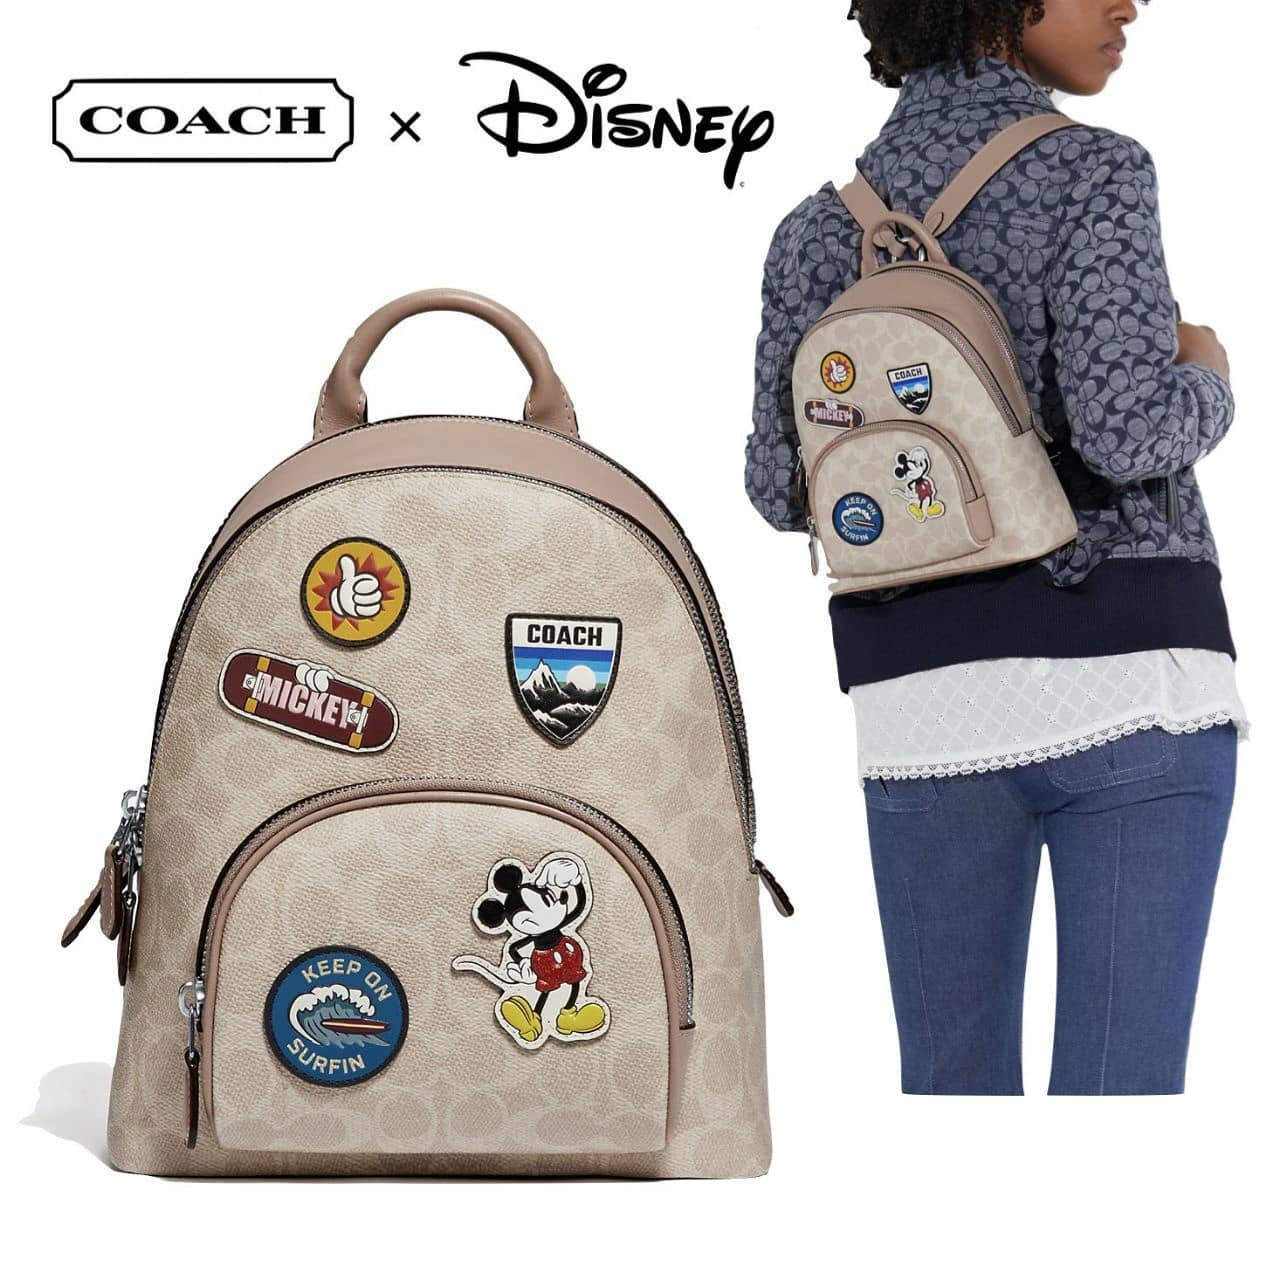 BALO COACH HỌA TIẾT CHUỘT CARRIE BACKPACK 23 DISNEY COLLABORATION MICKEY MOUSE 14